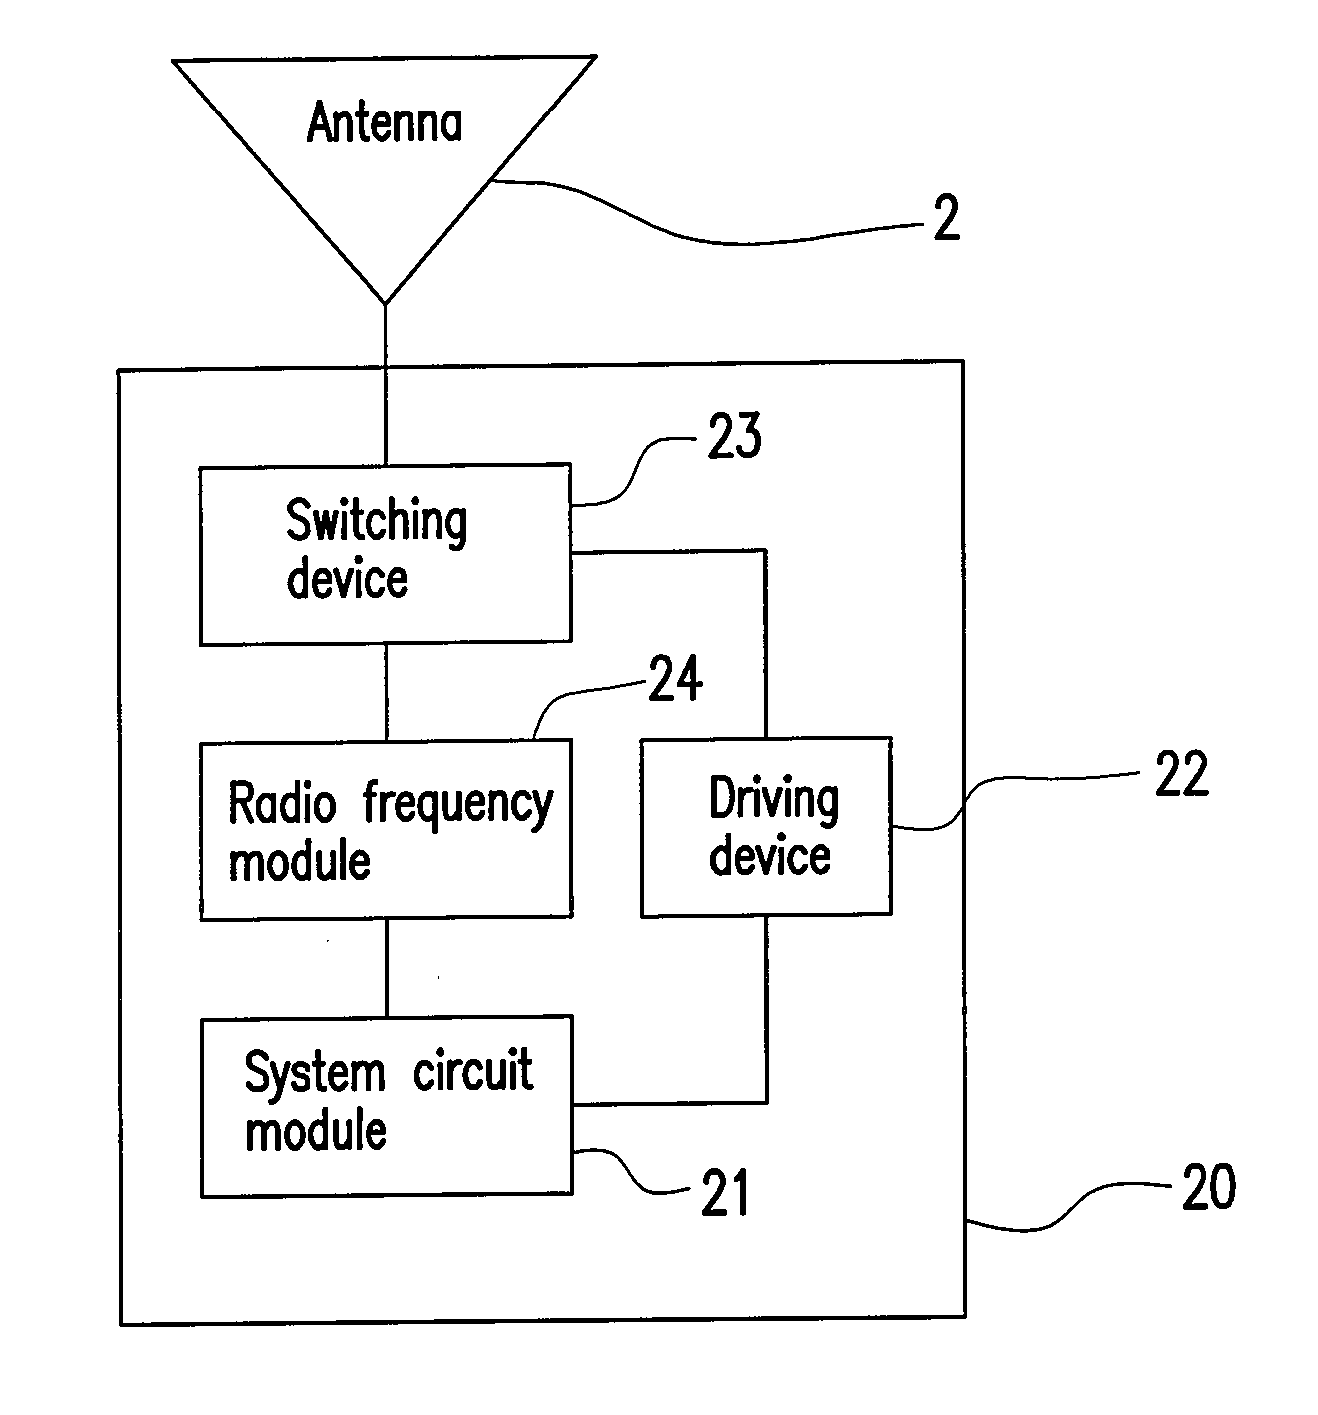 Apparatus and method for switching frequency band of antenna